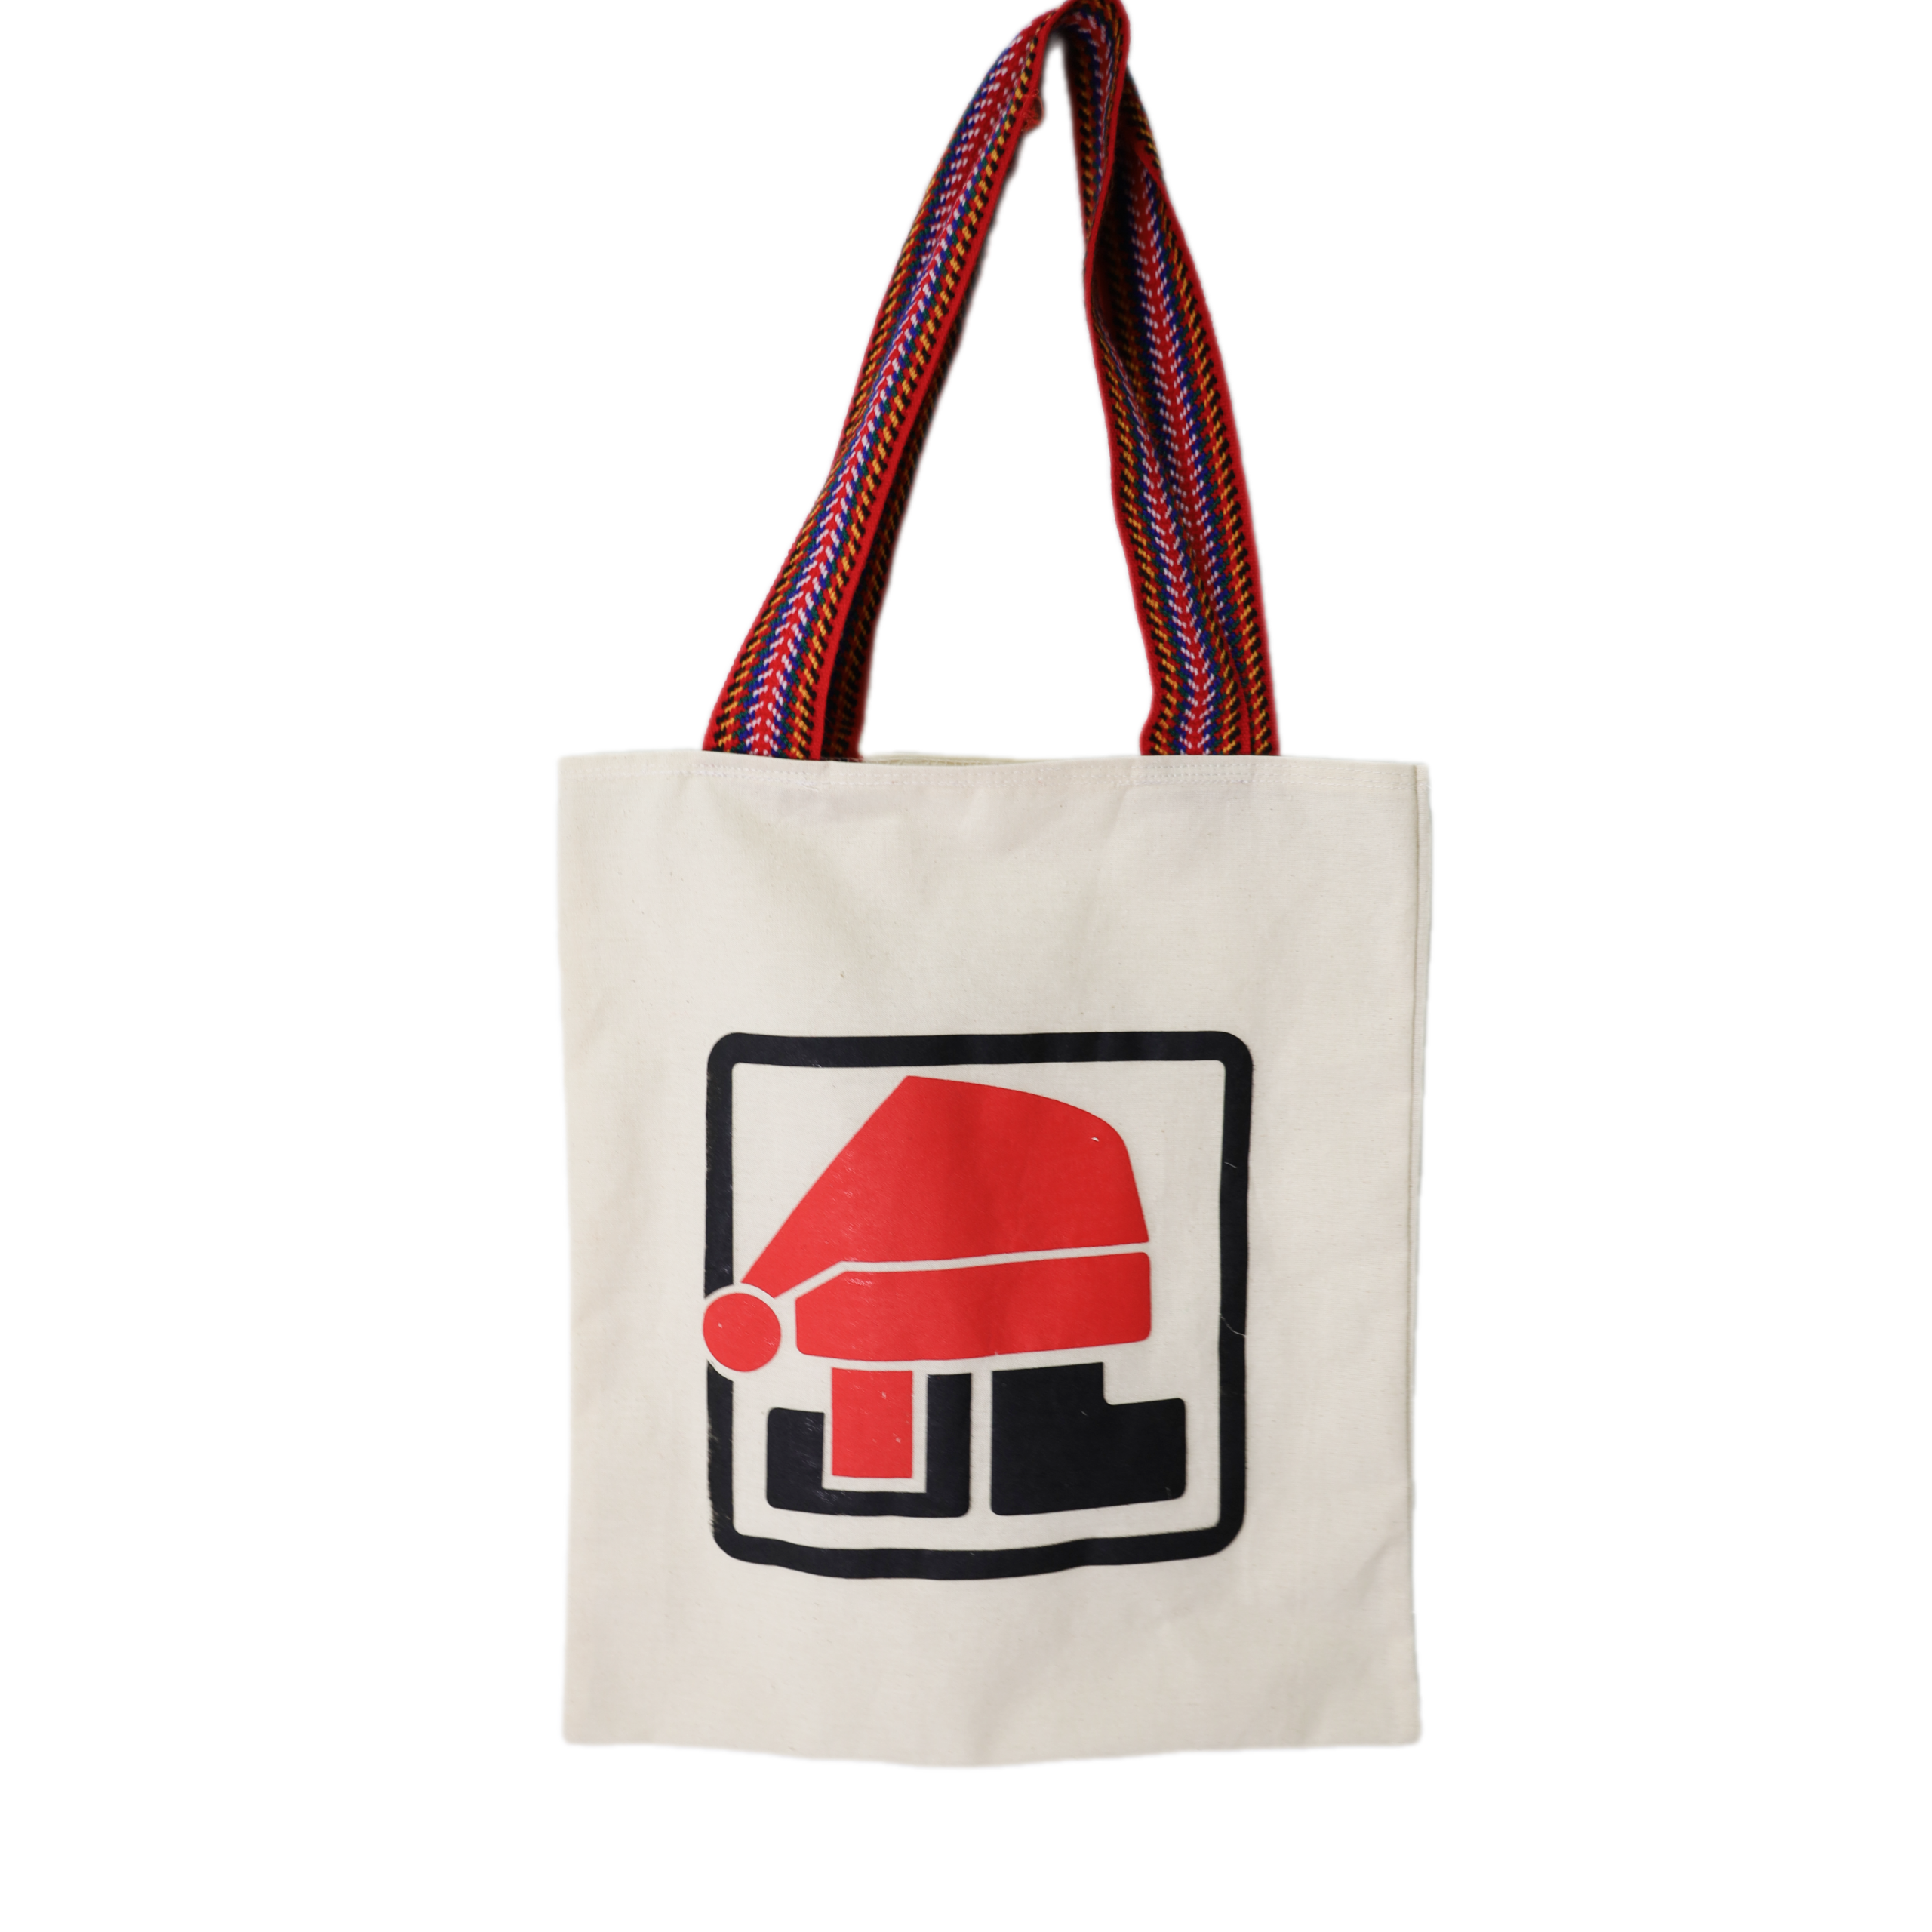 Featured image for “Tote bag FDV”